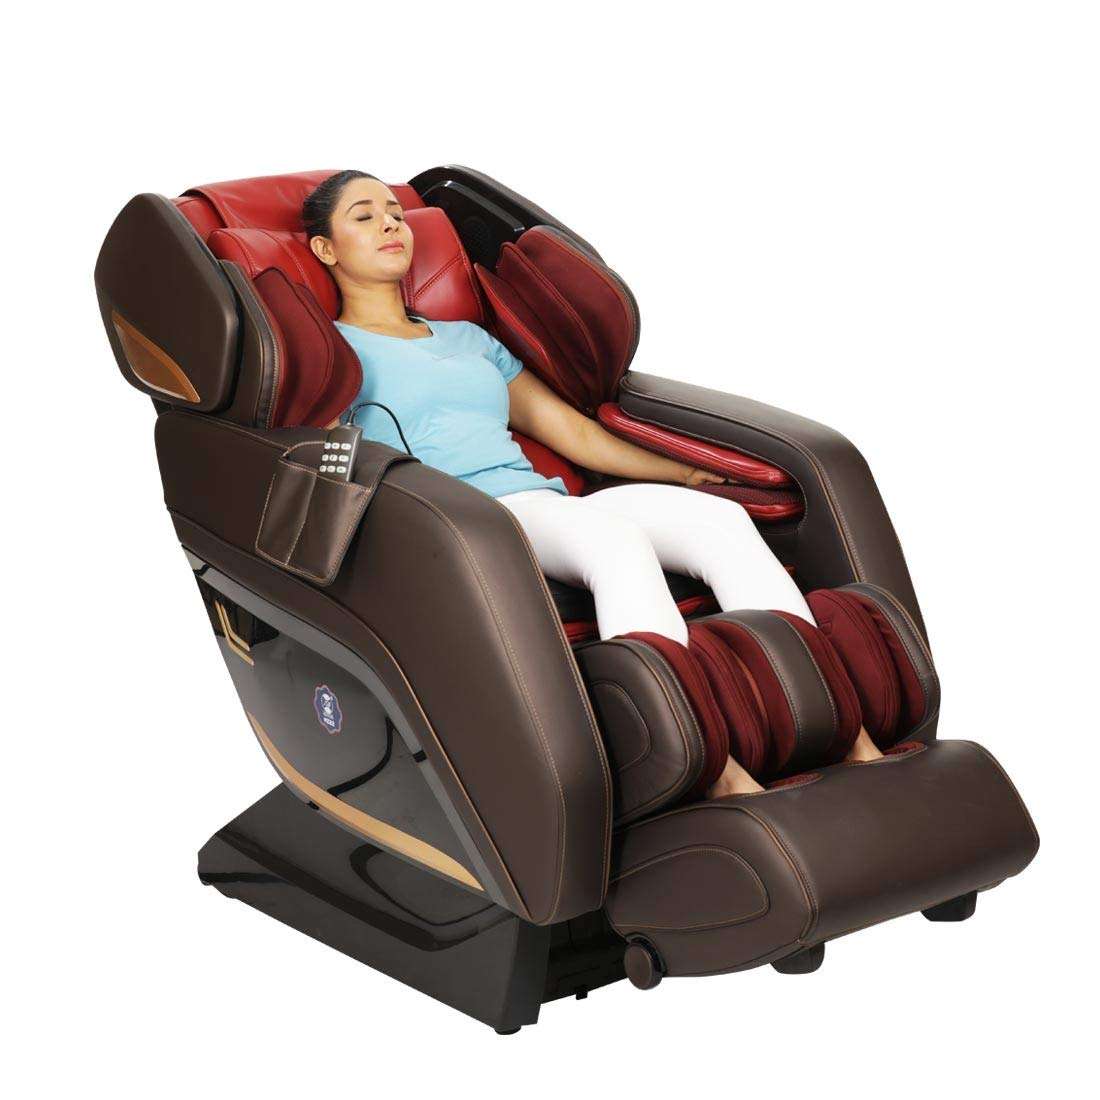 Top 5 Best Massage Chairs India 2020 (Reviews) Amazon ...